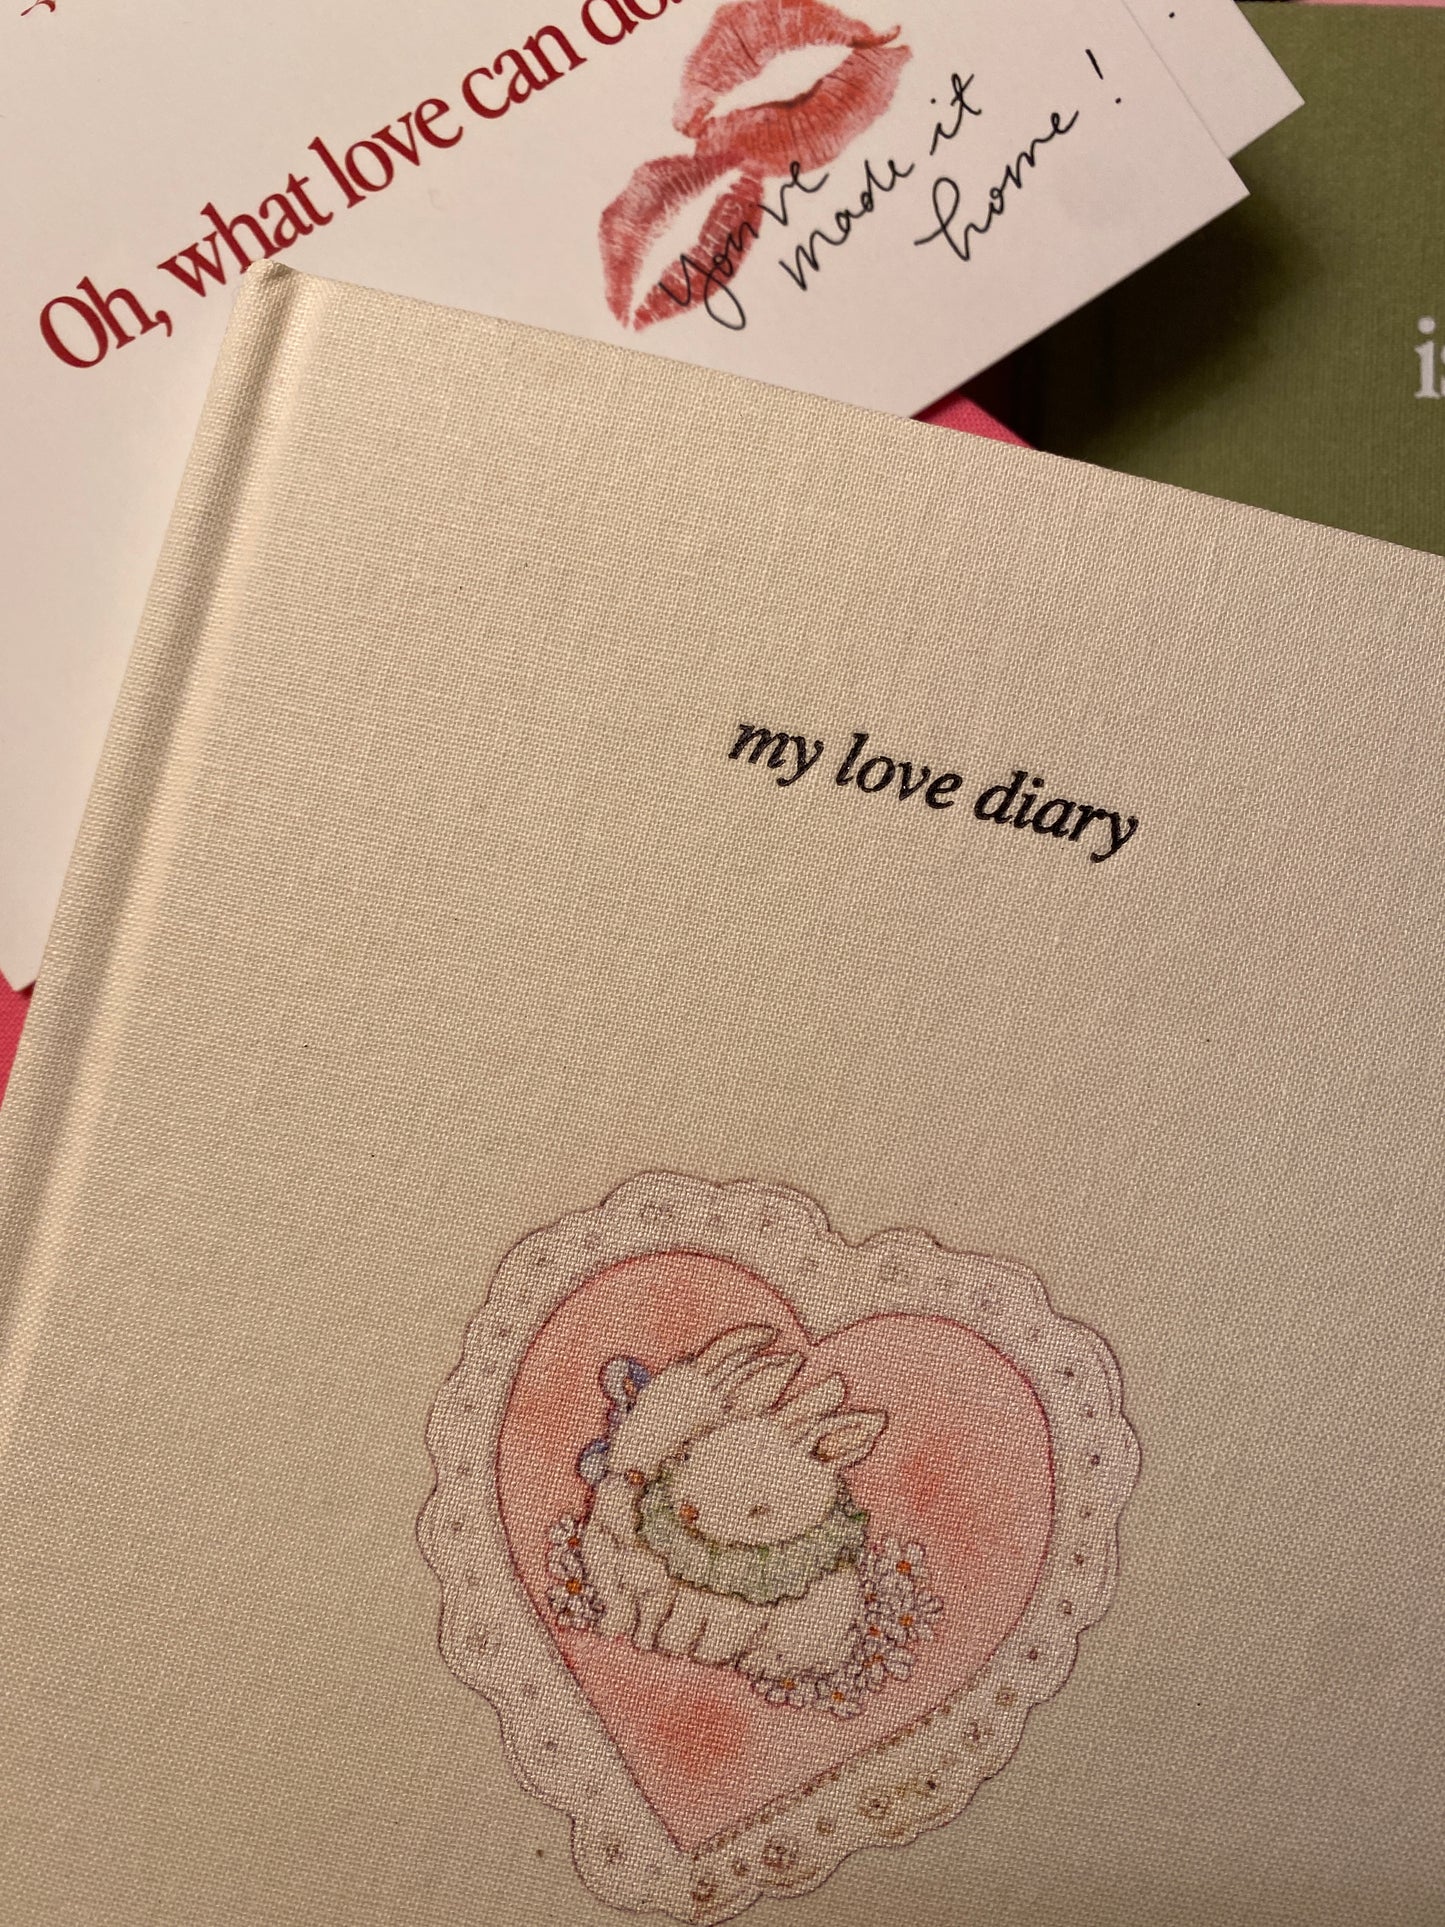 The Love Diary